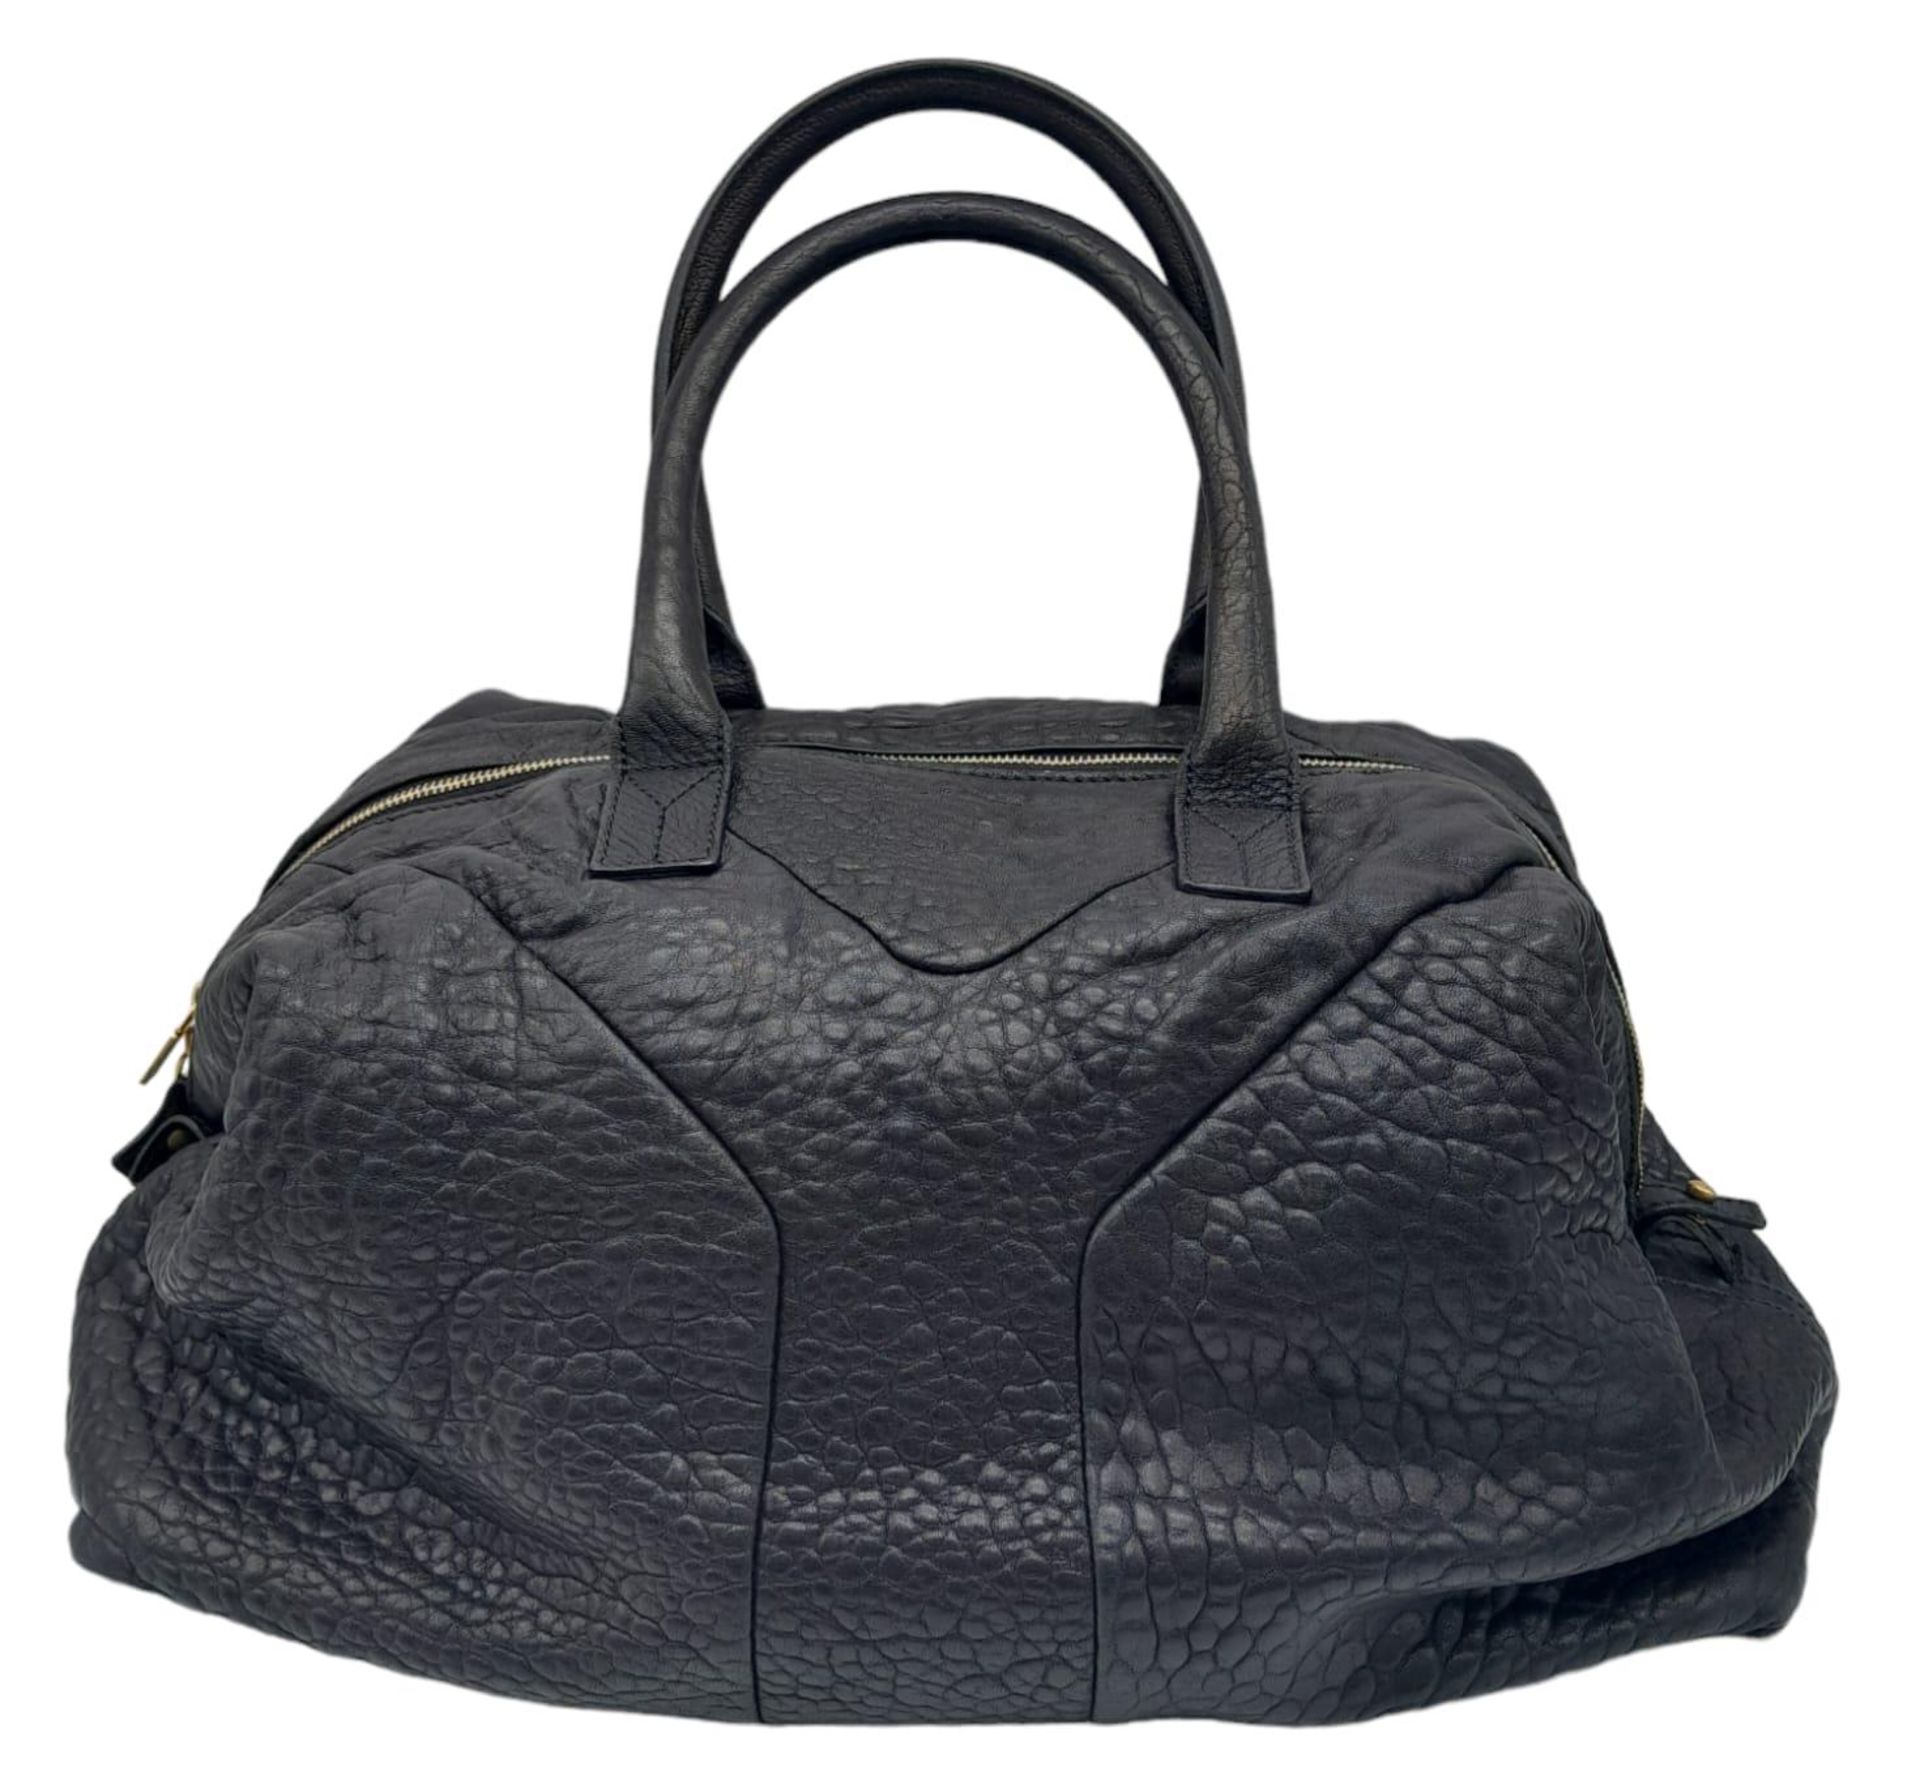 An Yves Saint Laurent Black Easy Bag. Leather exterior with gold hardware, double zipper, and 5